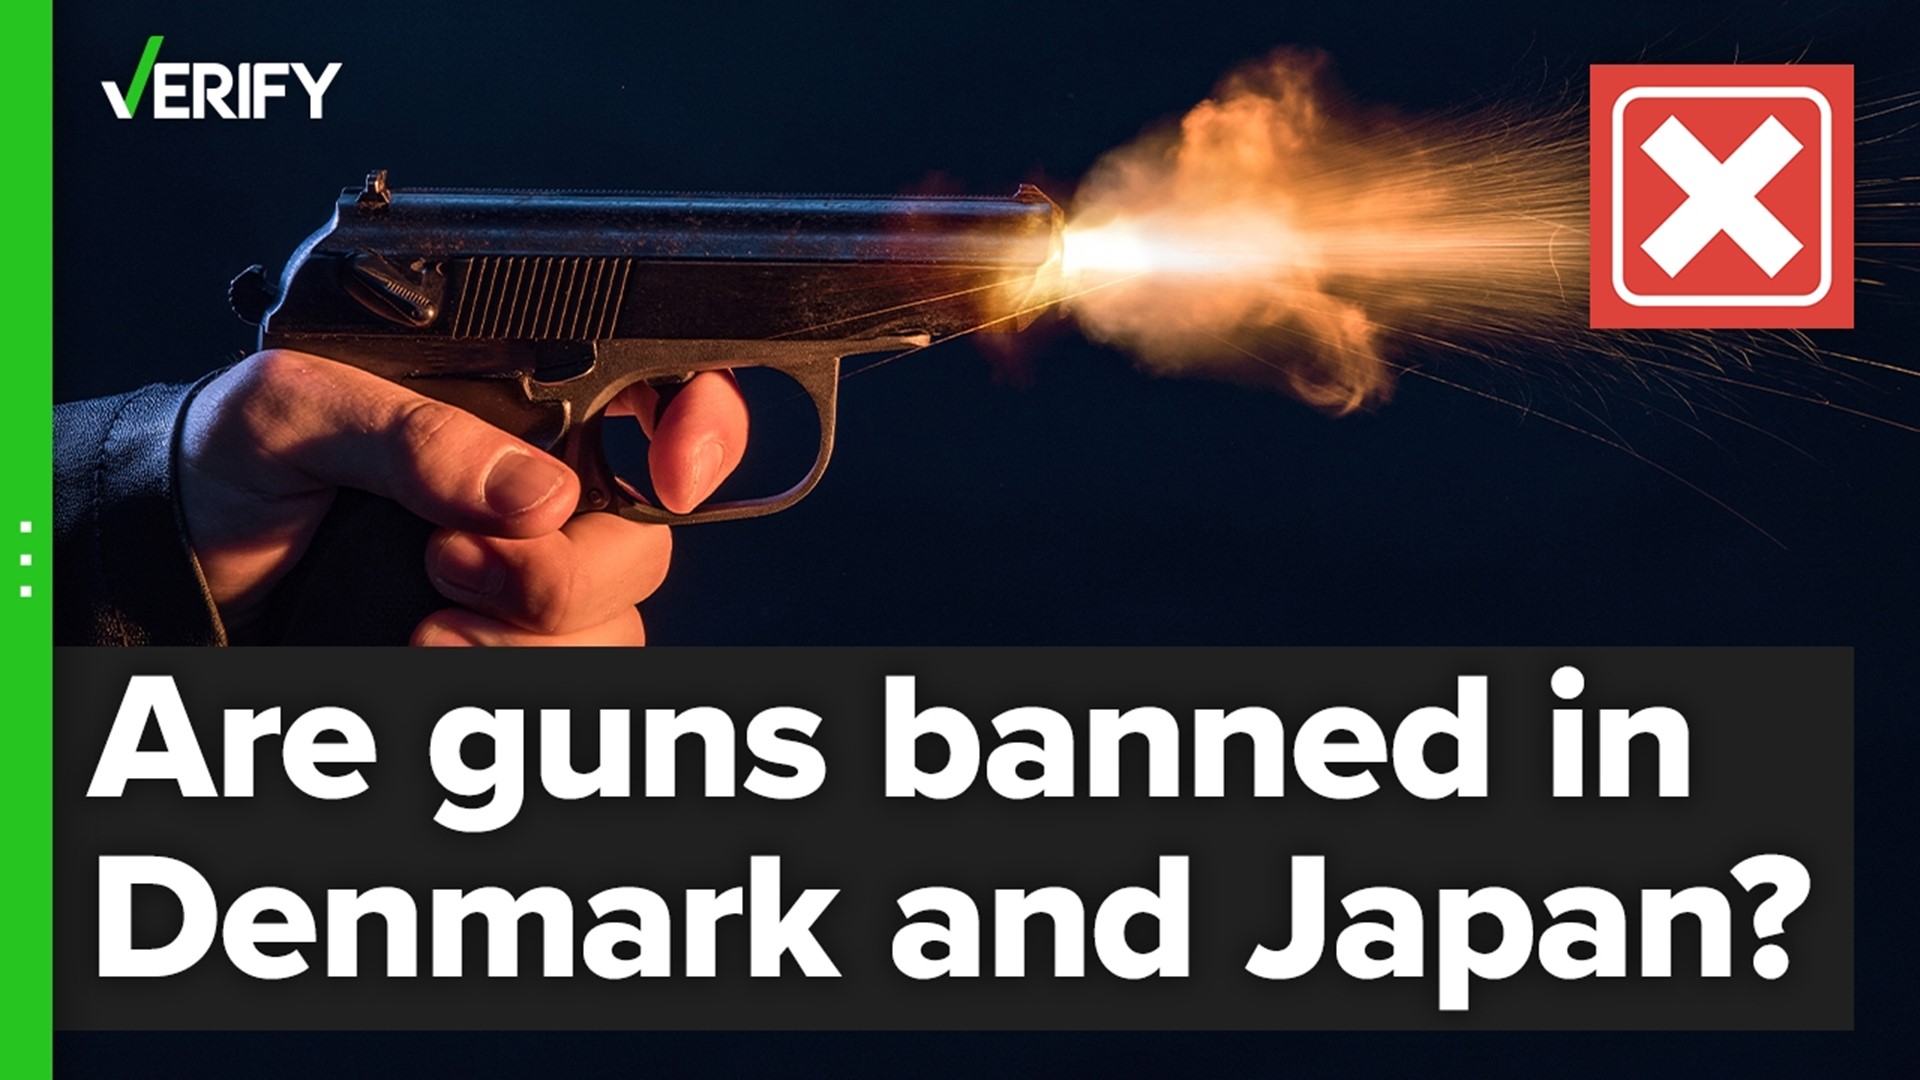 After the assassination of Shinzo Abe, some online claimed Japan has banned guns in the country. That’s false, but they are strictly regulated.